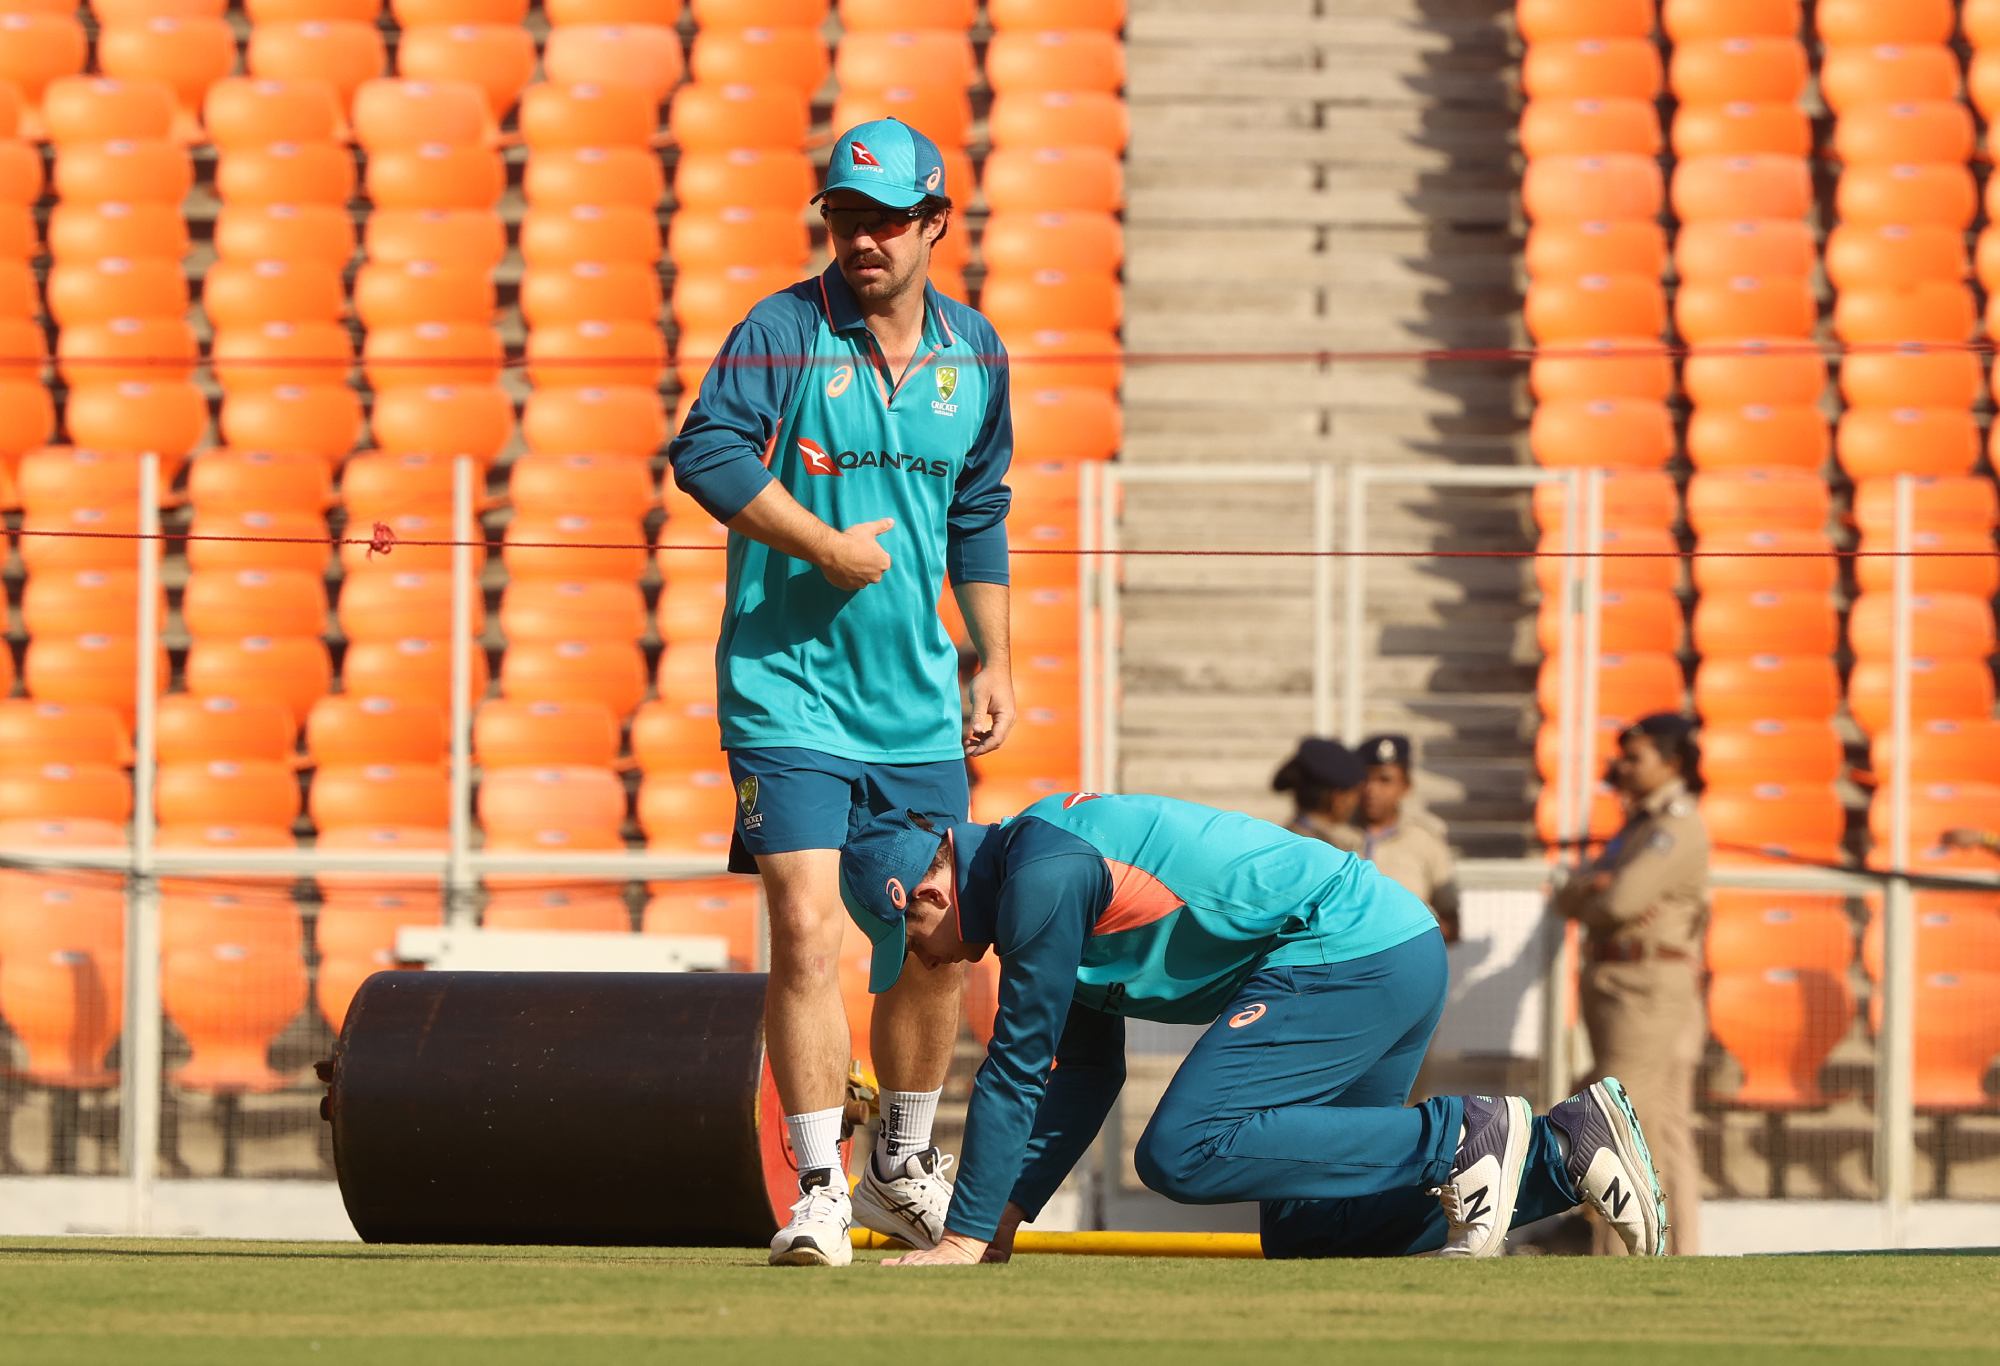 AHMEDABAD, INDIA - MARCH 7: Travis Head and Steve Smith of Australia inspect the pitch during a training session of Australia Test Team at Narendra Modi Stadium on March 7, 2023 in Ahmedabad, India. (Photo by Robert Cianflone/Getty Images)